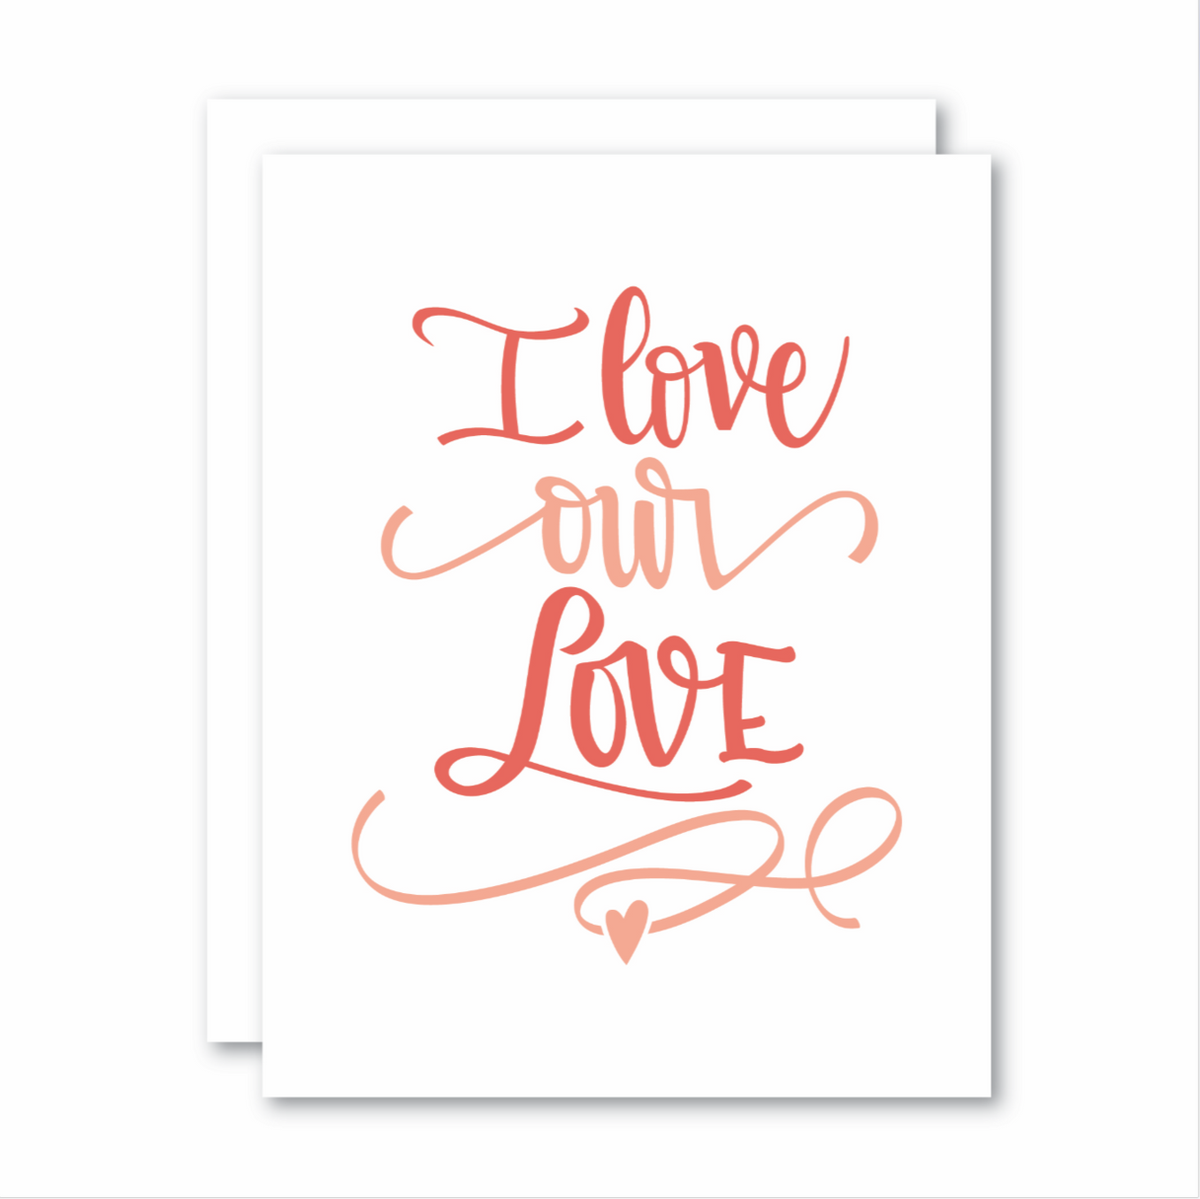 Living Fresh Flower and Plant Studio - I Love Our Love Card